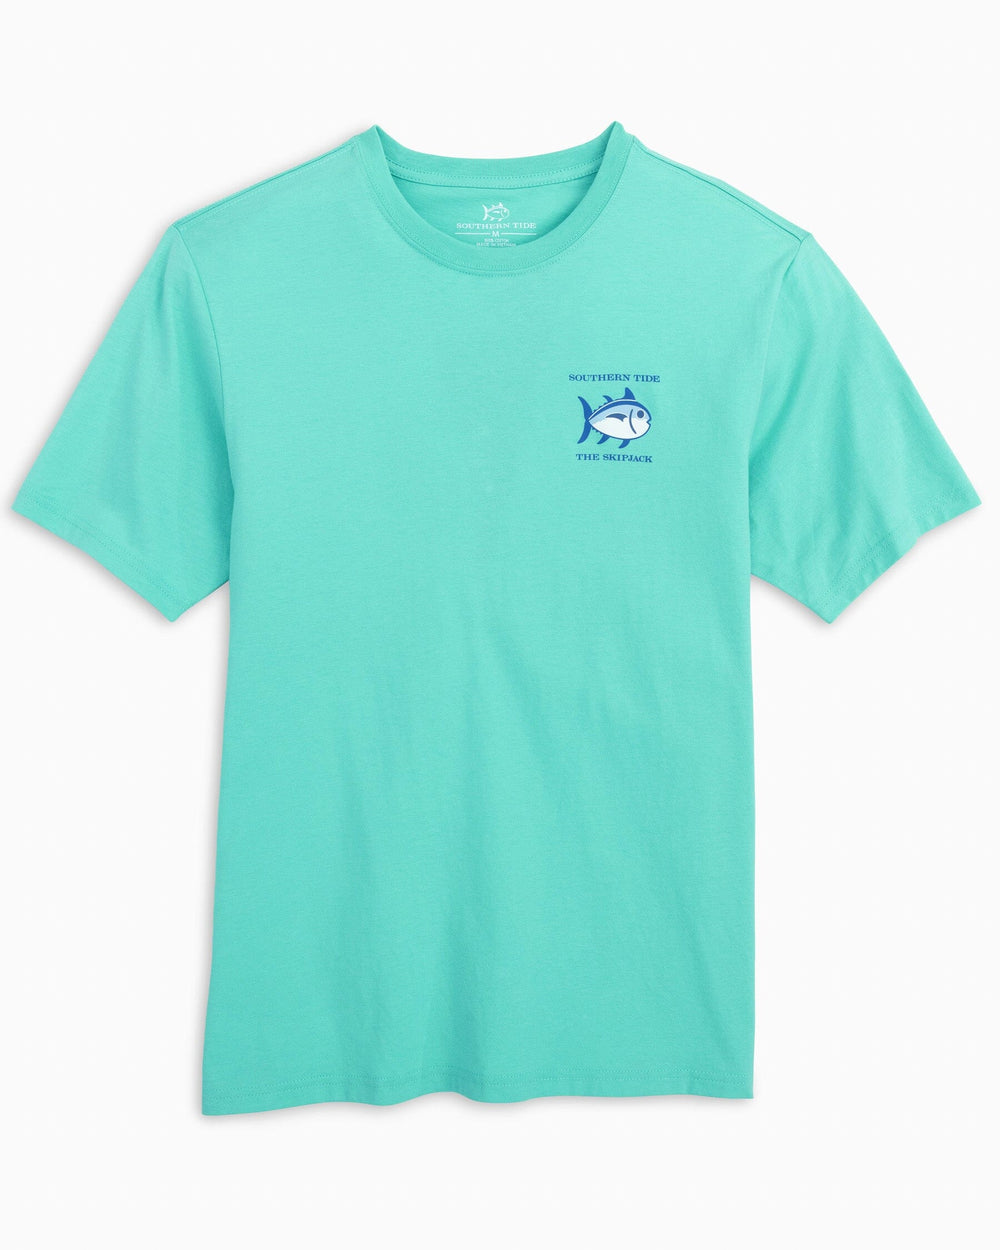 The front view of the Southern Tide Original Skipjack Short Sleeve T-Shirt by Southern Tide - Cool Mint